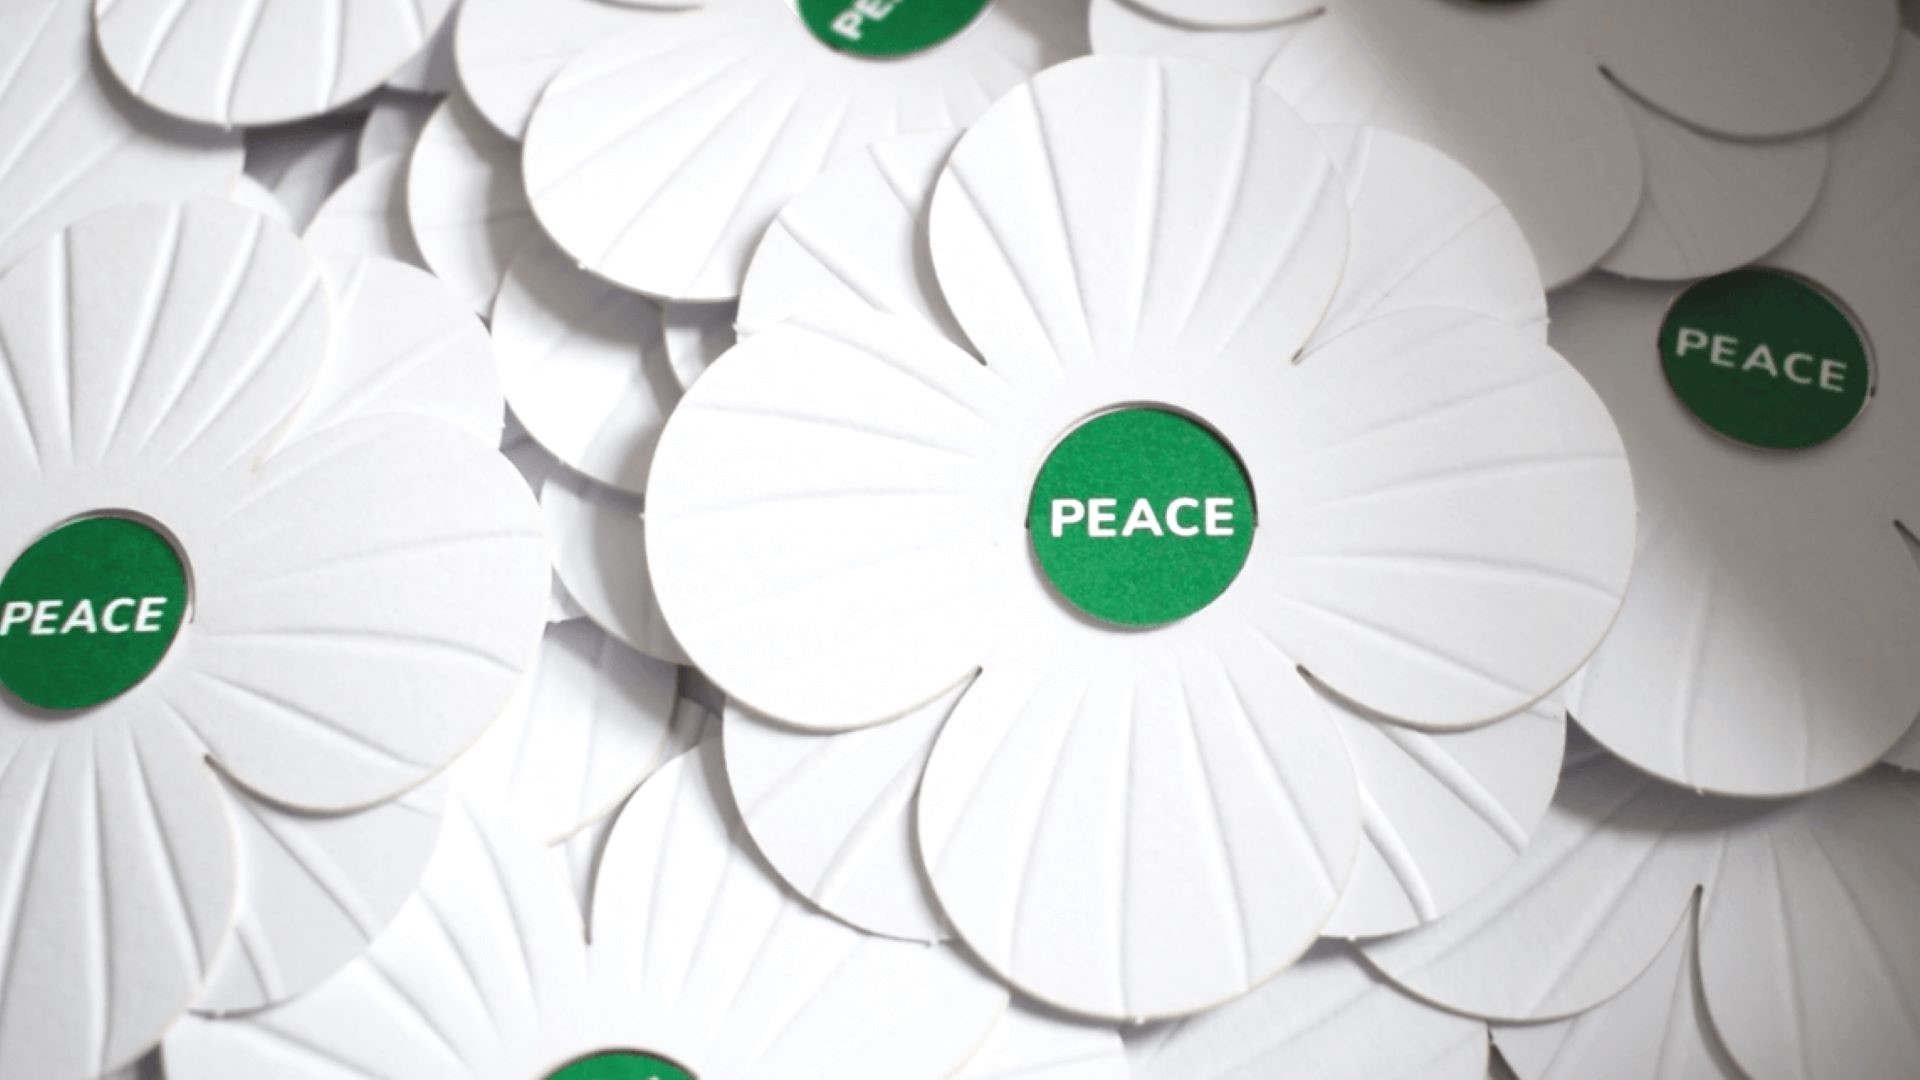 Design co-op Calverts overhauls white remembrance poppy with eco-friendly design